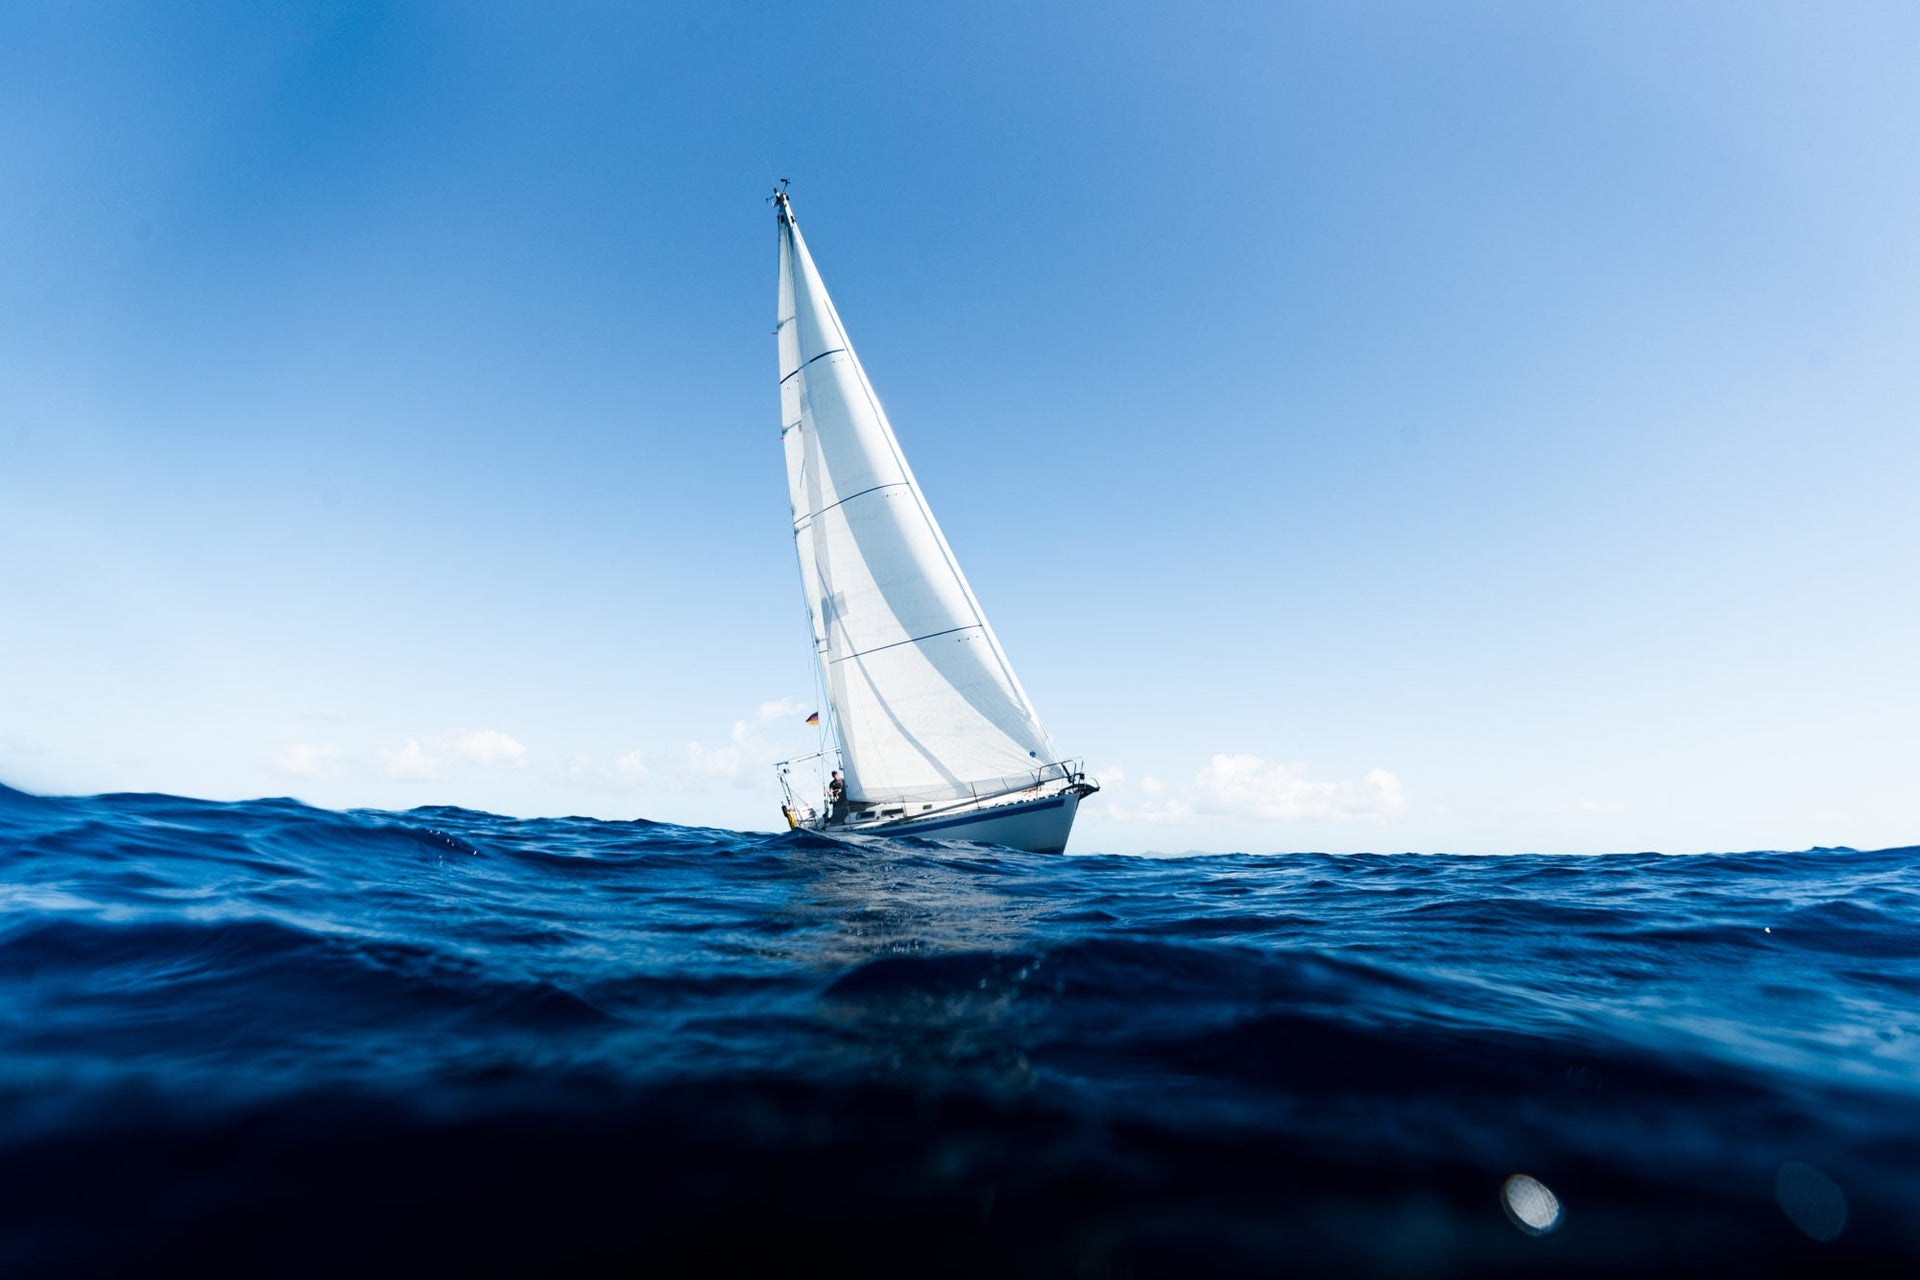 THE BEST SAILS FOR CRUISING